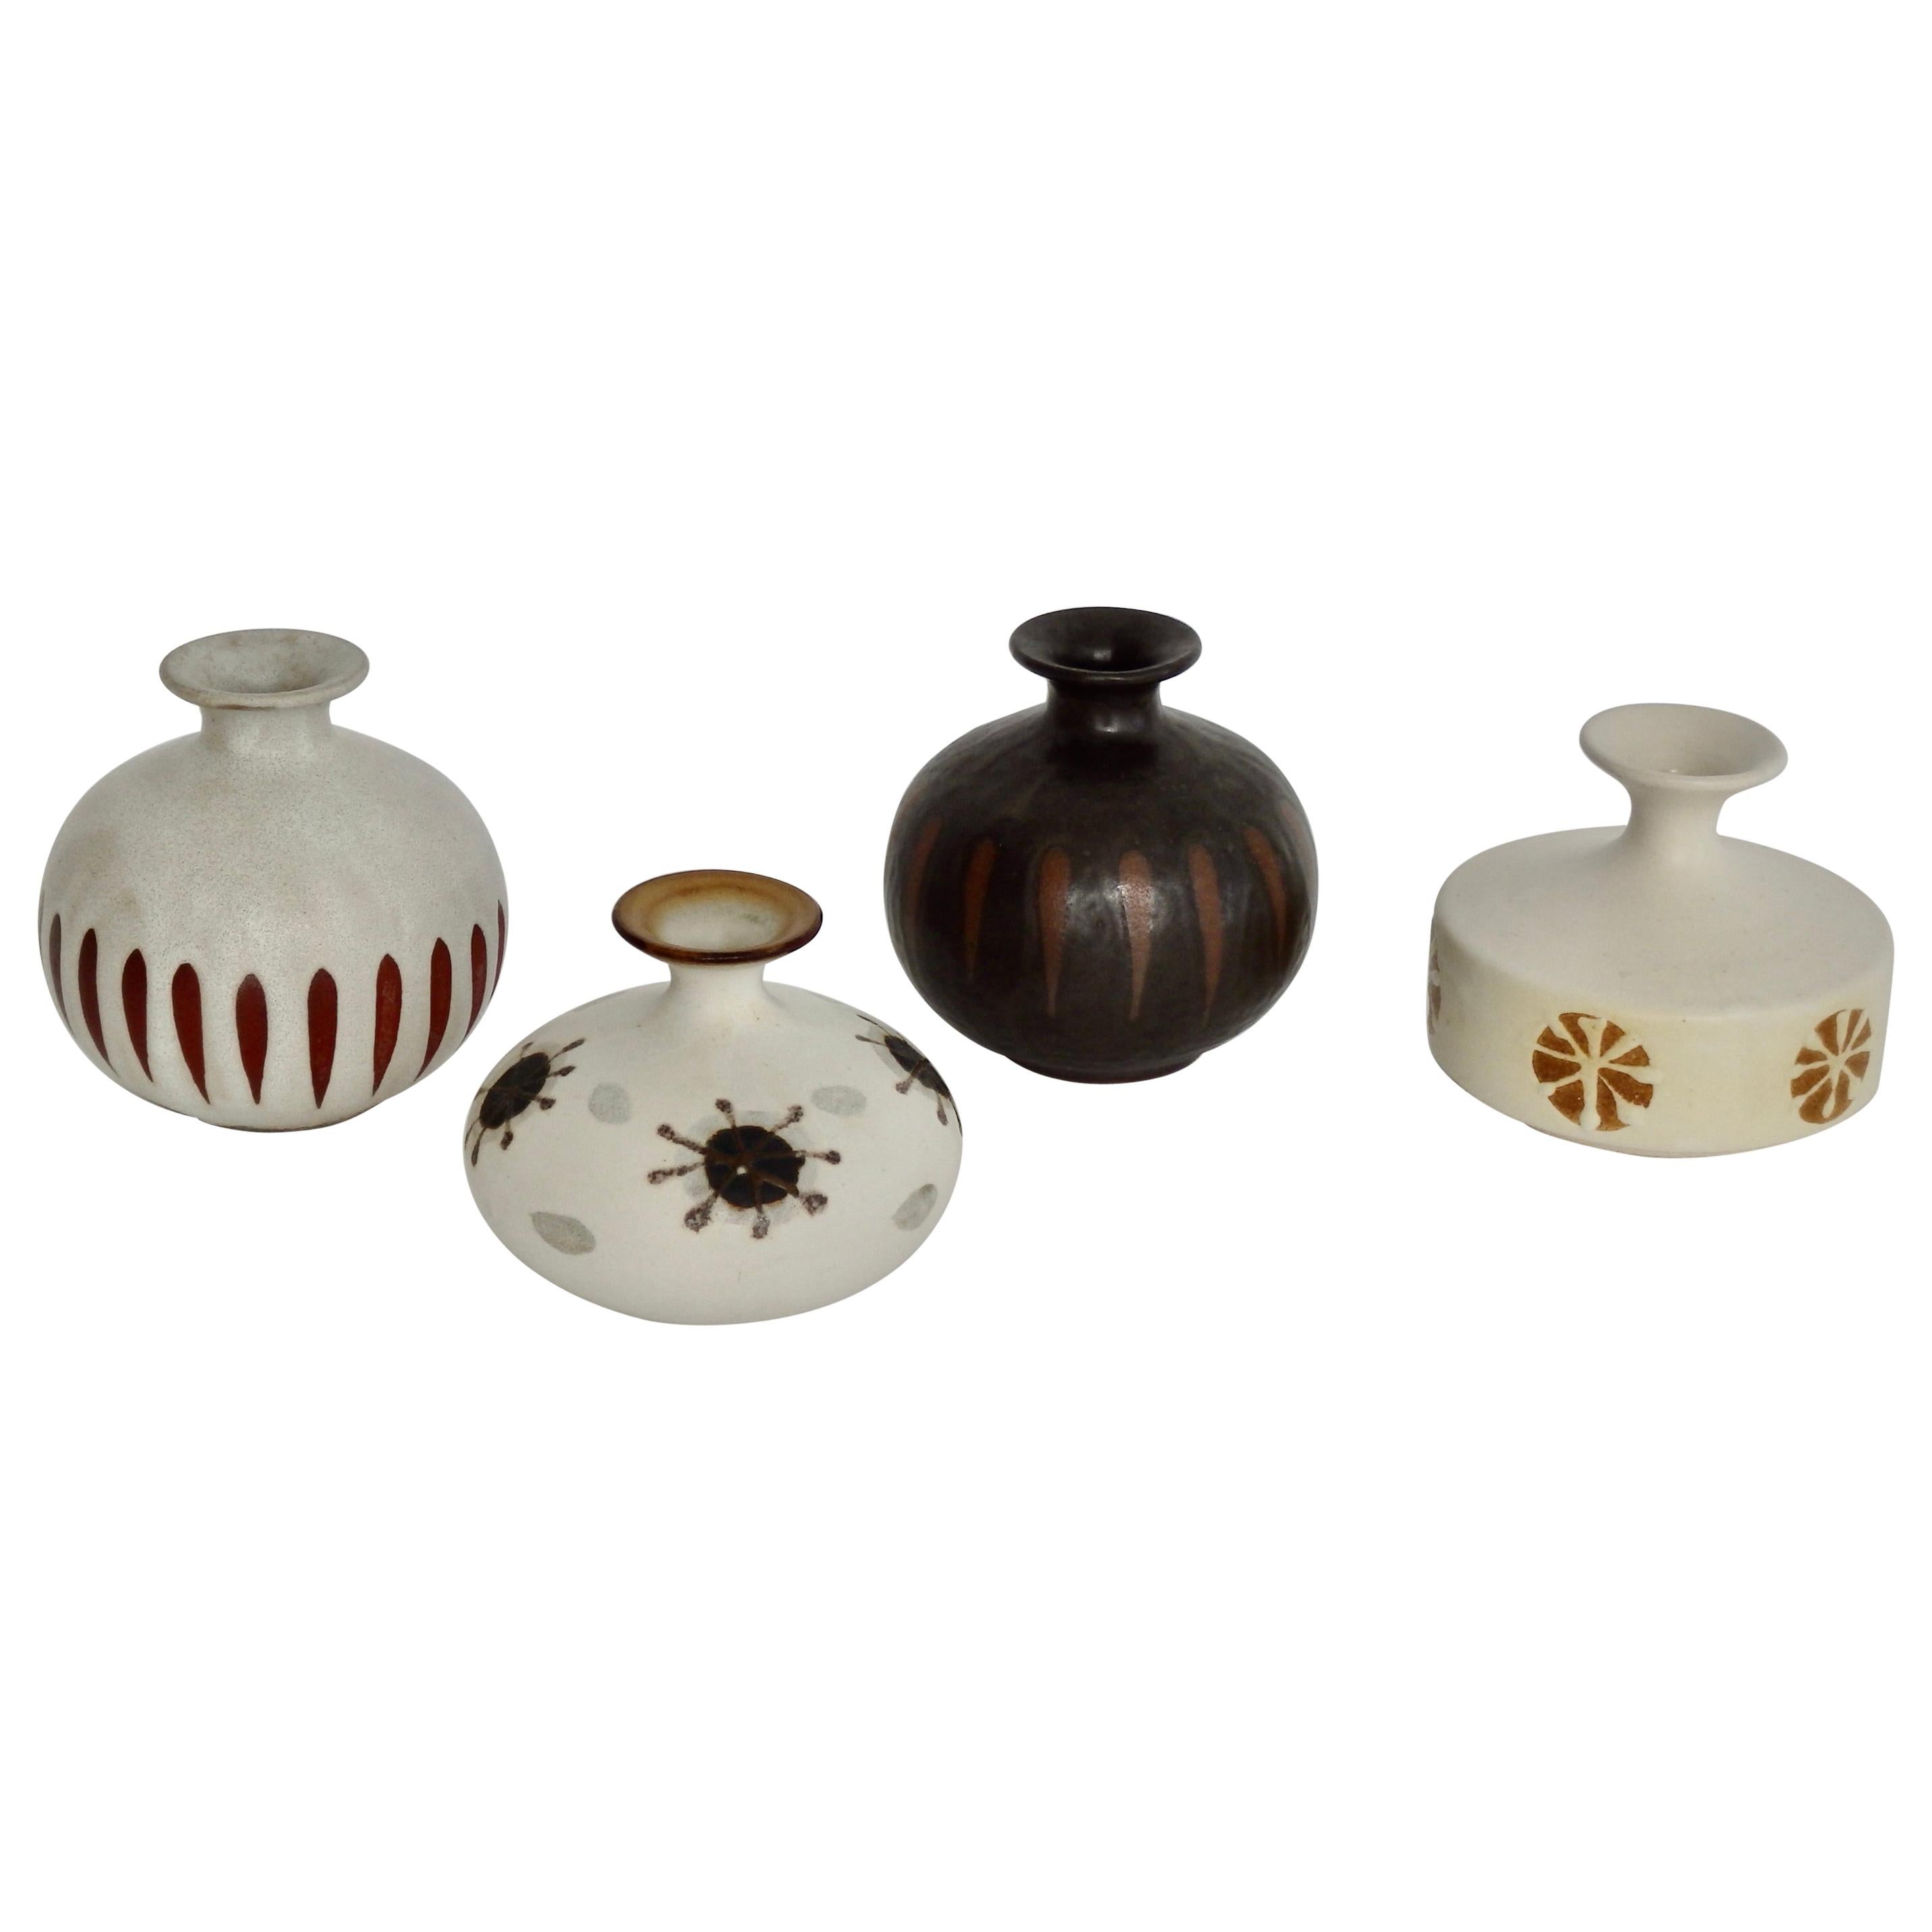 Four Piece Japanese Weed Pot Collection by Otagiri Mercantile Company